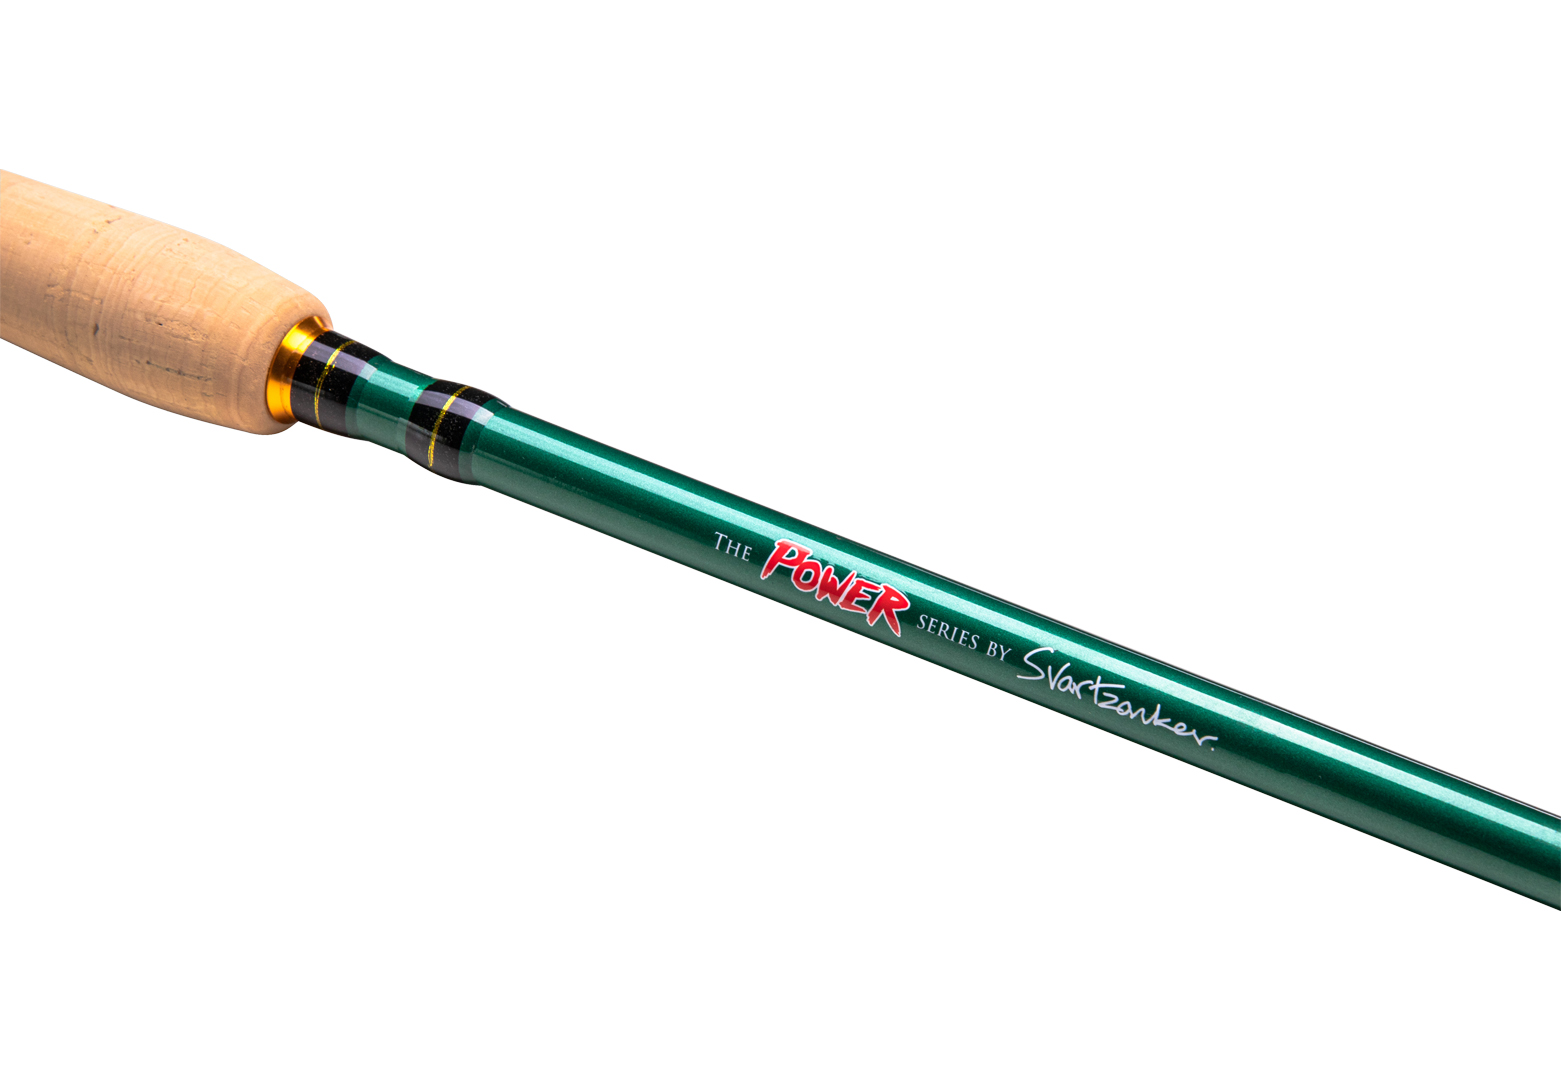 Our new rod series The Power Series has just arrived.Available in many different models for both pike and perch fishing and in casting and spinning models.Check them out at your local dealer!